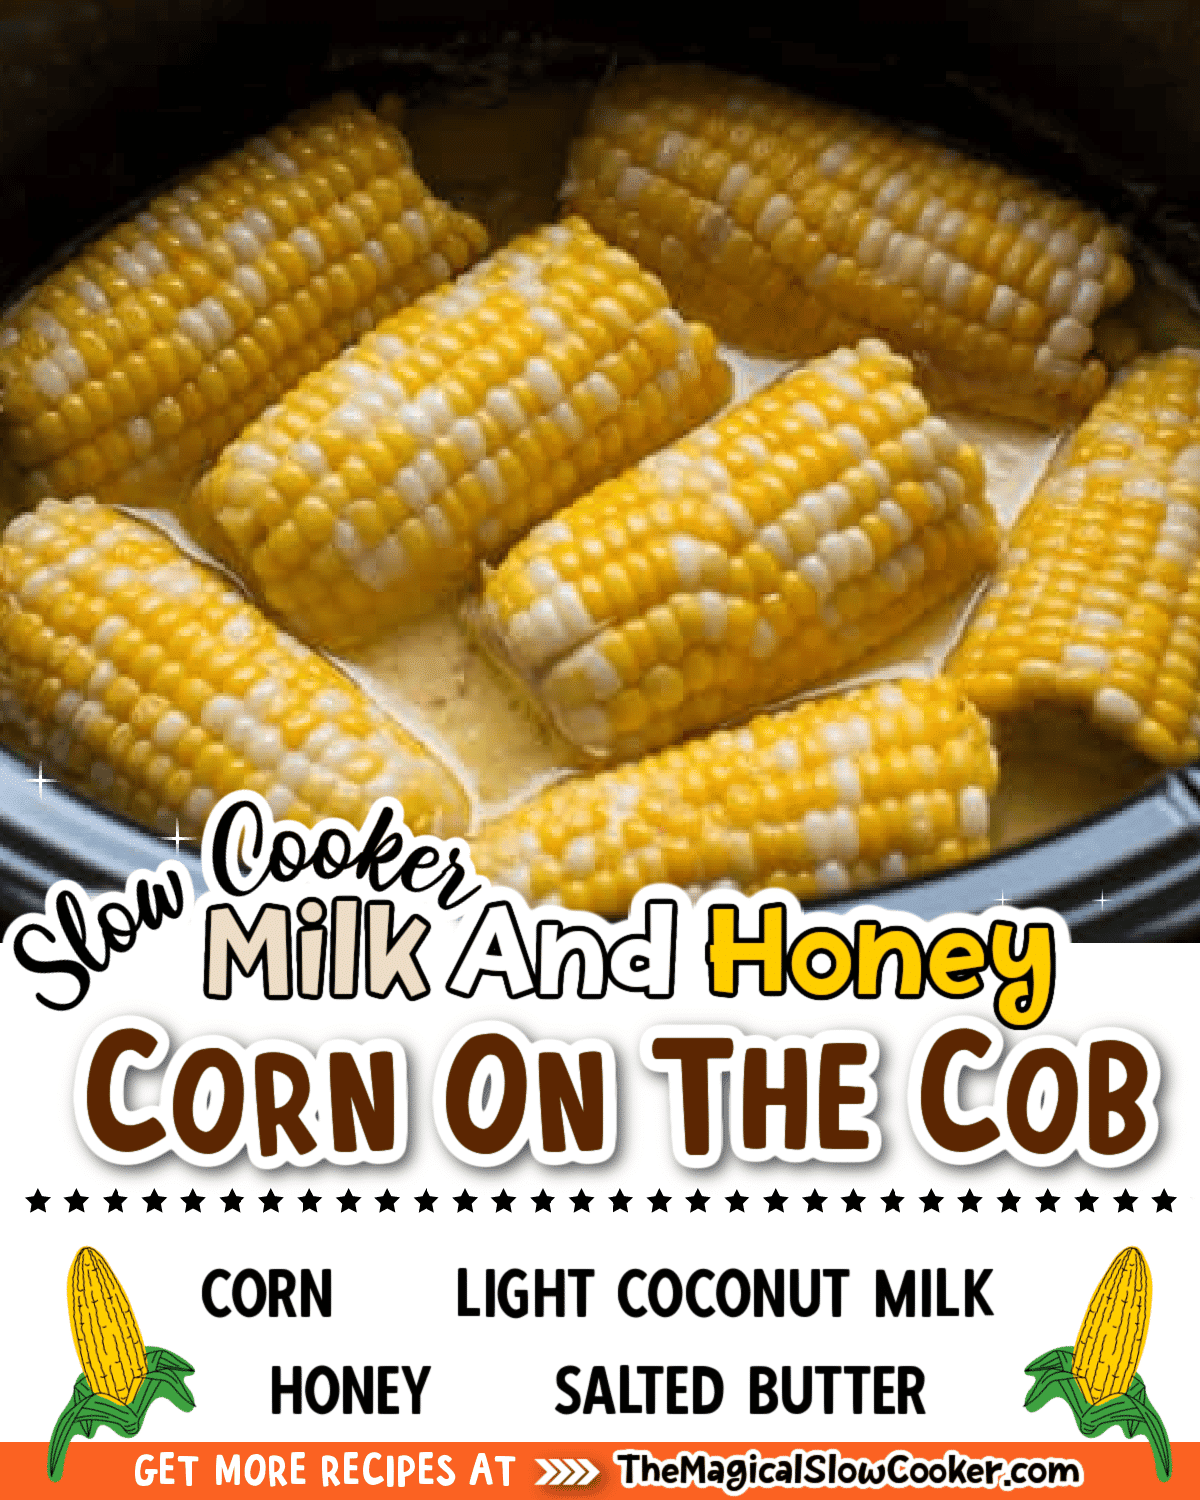 Collage of milk and honey corn images with text of what ingredients are.